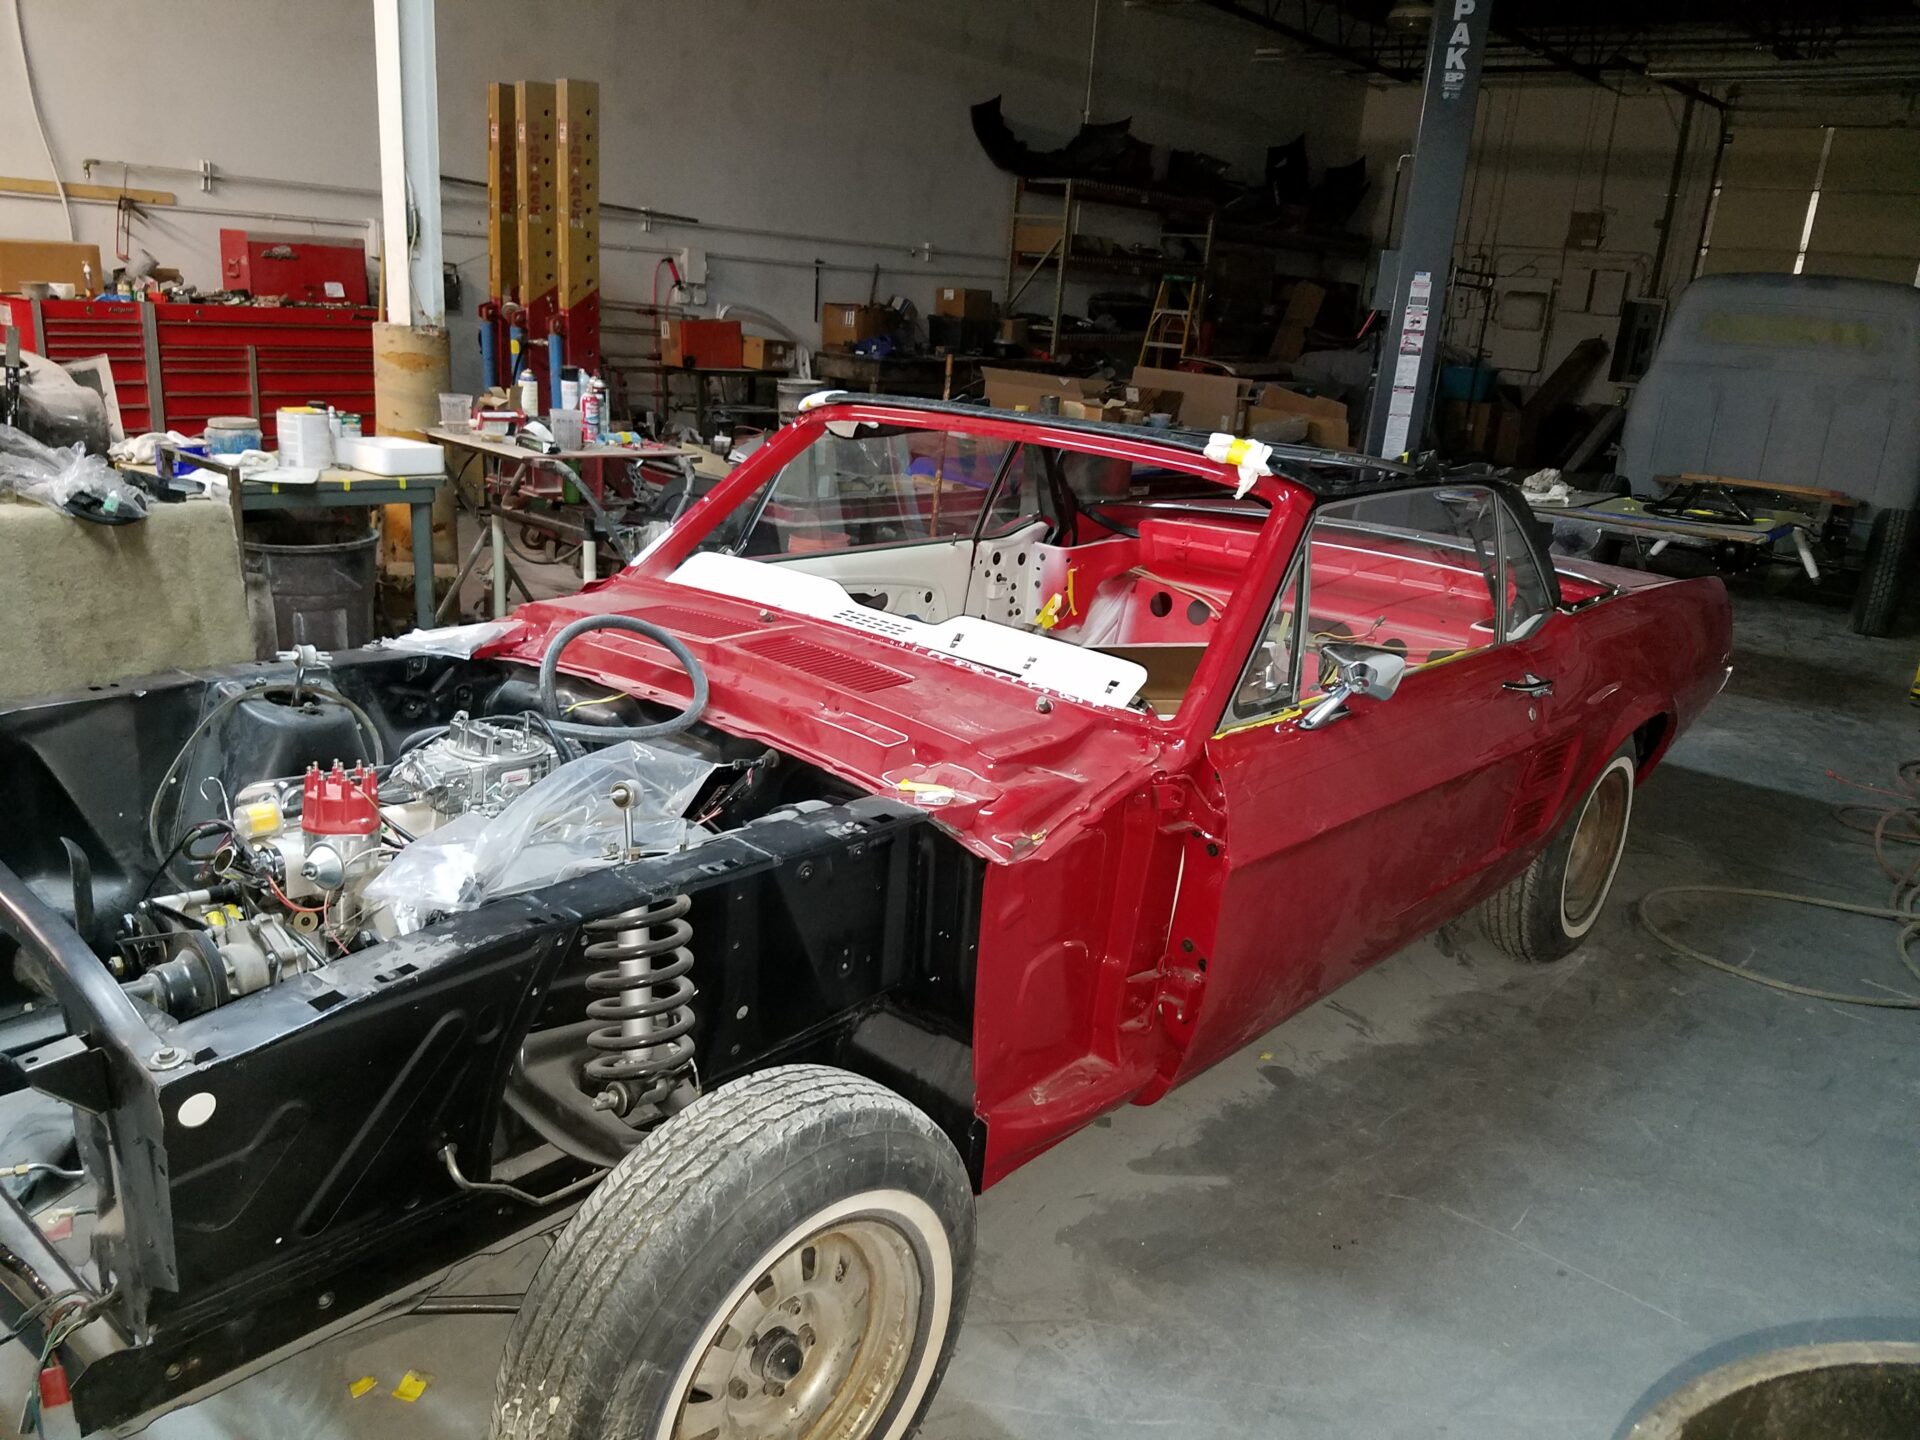 A 1967 Ford Mustang Convertible with partially completed parts